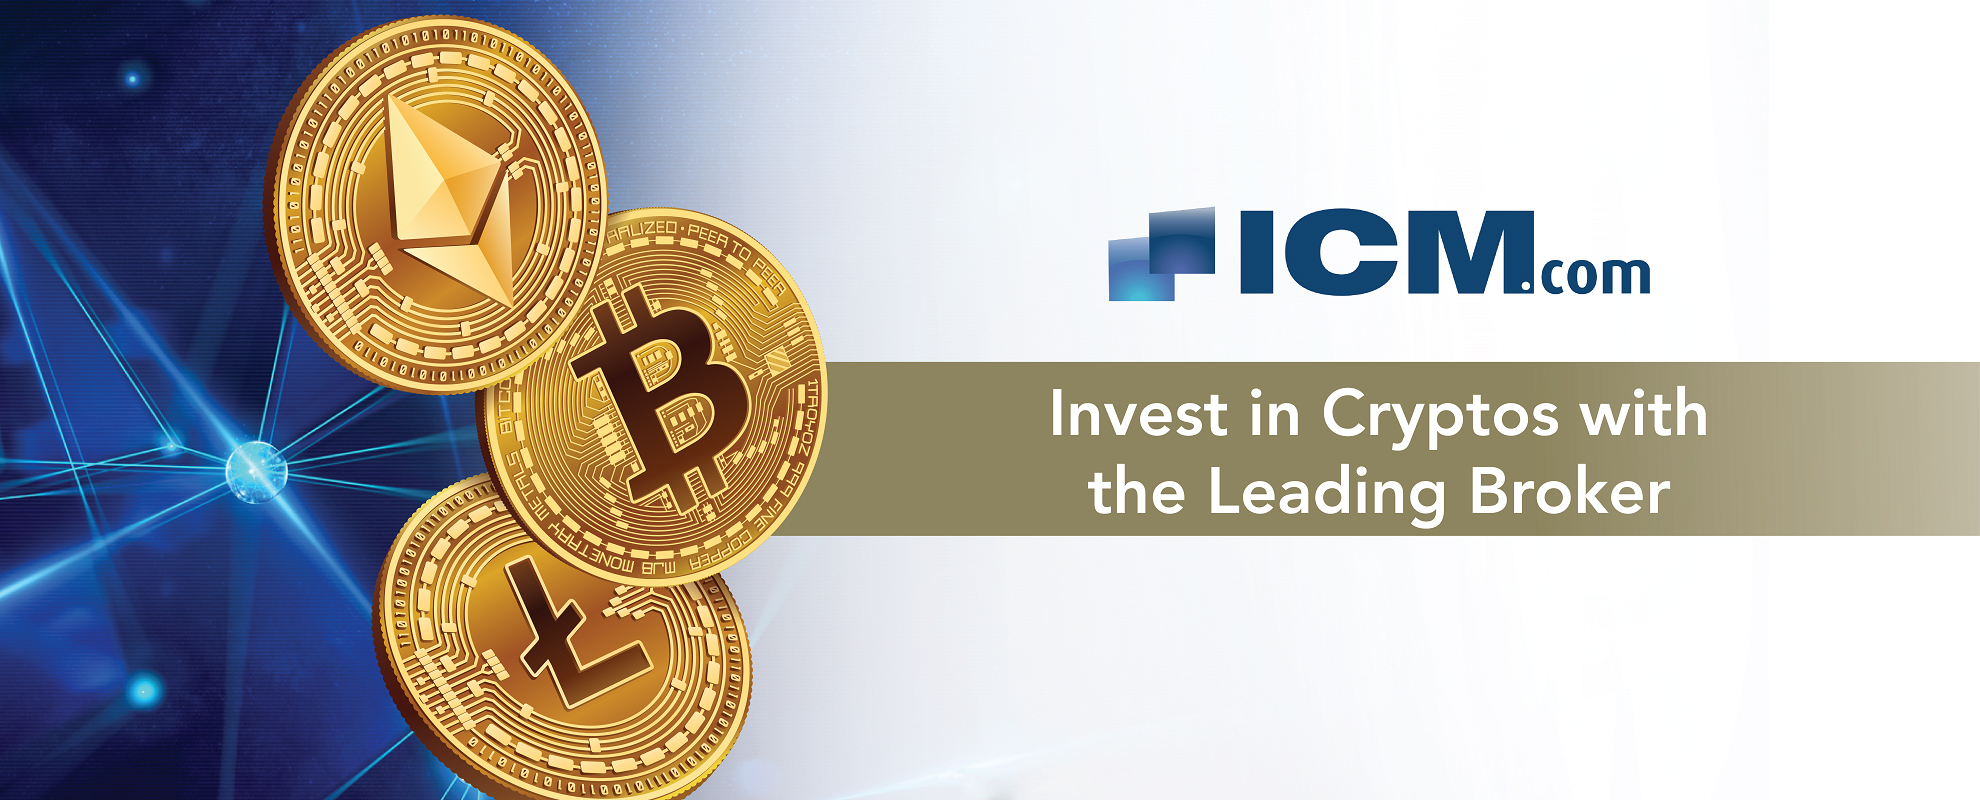 Invest in Cryptos with the Leading Broker